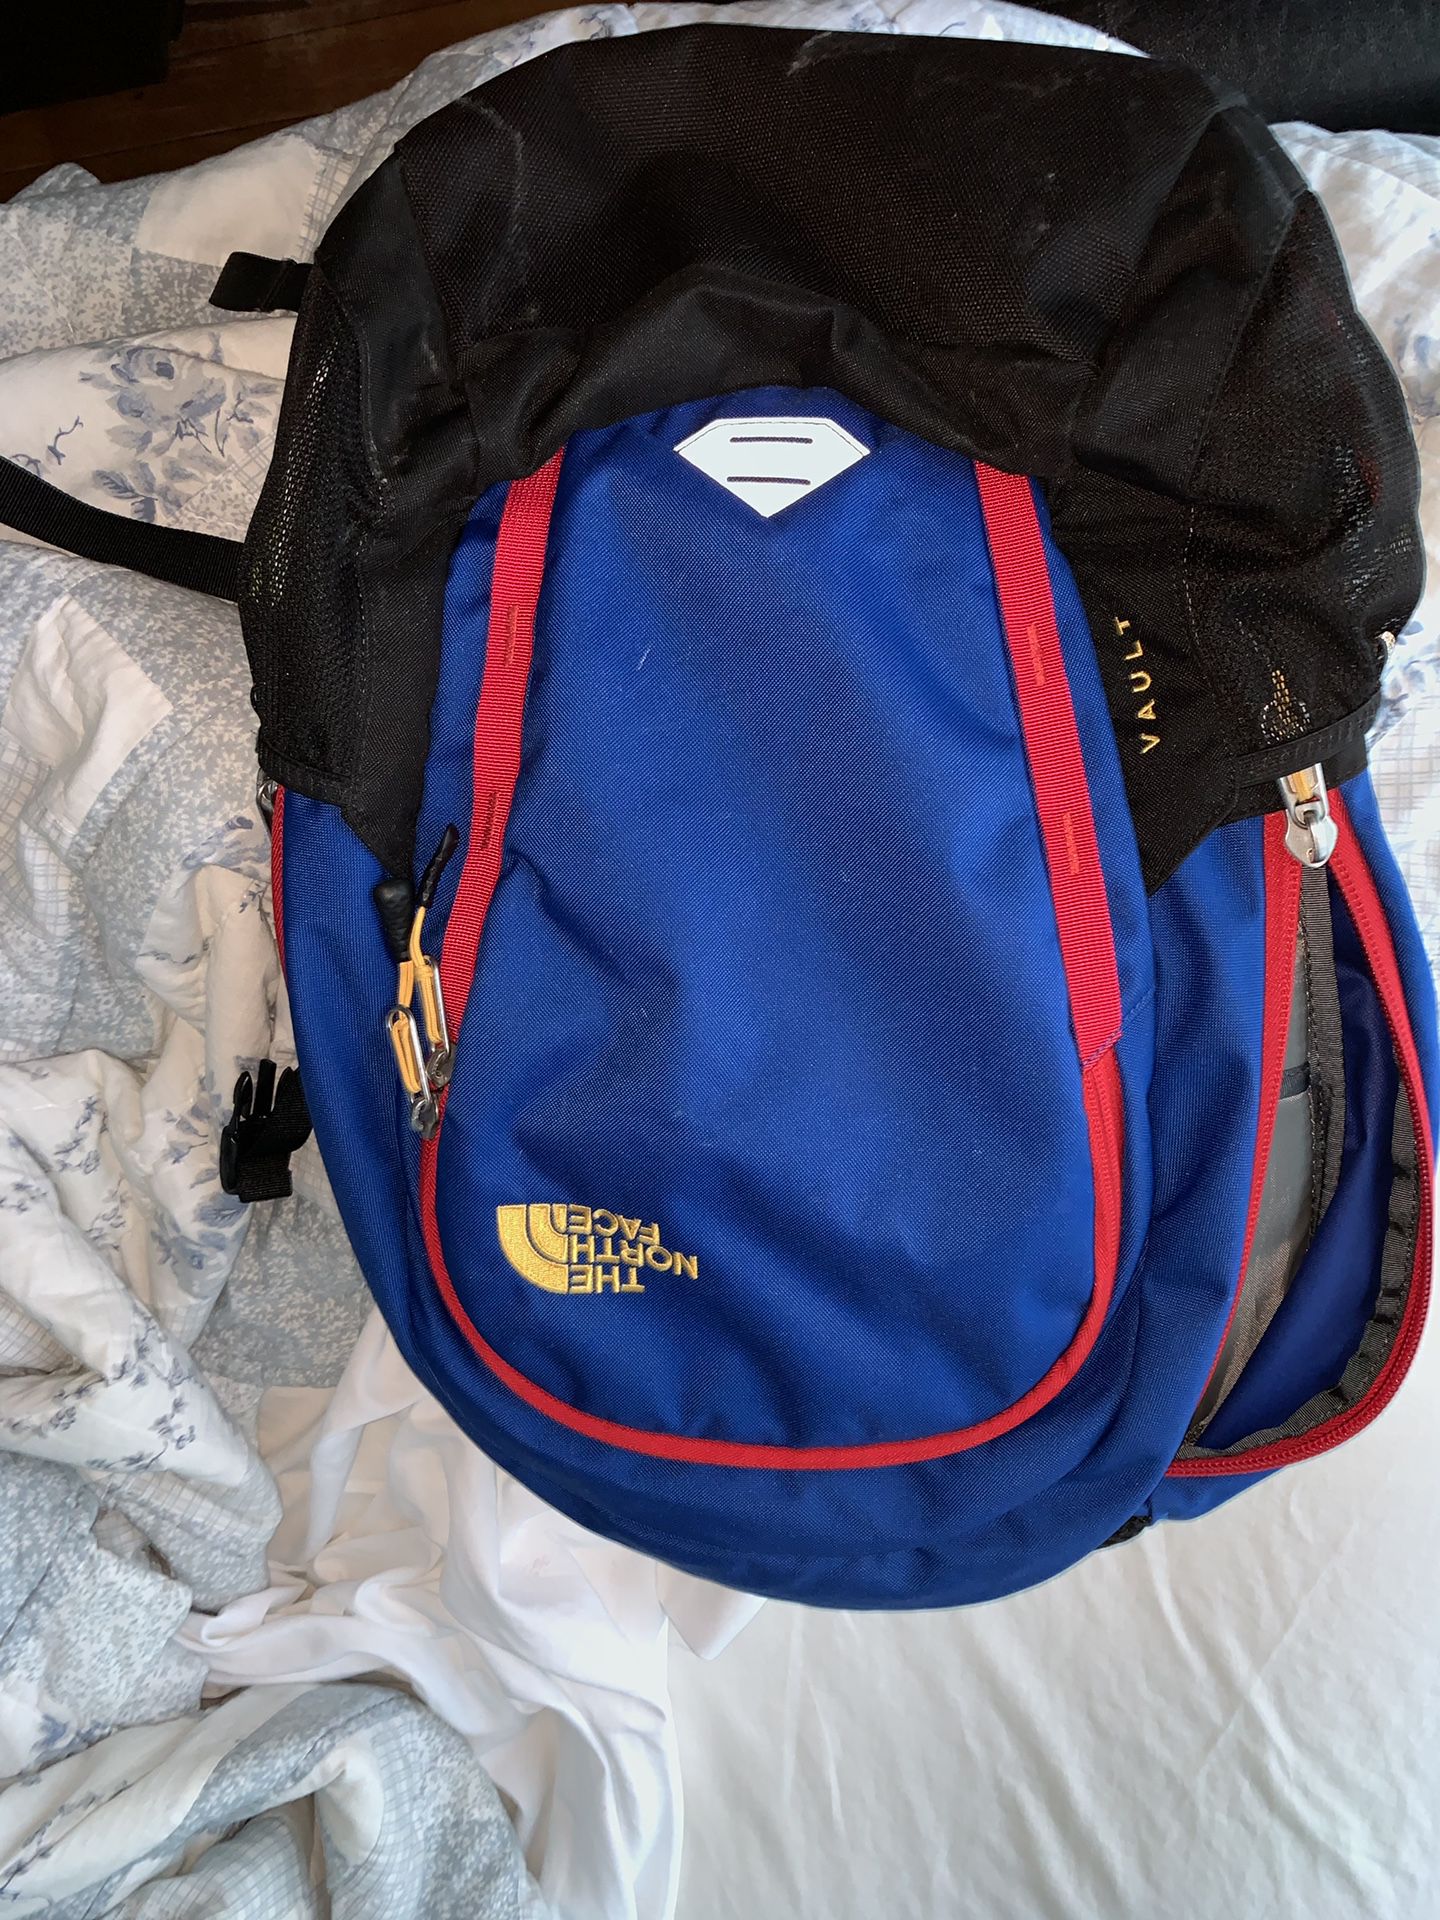 Brand new north face backpack